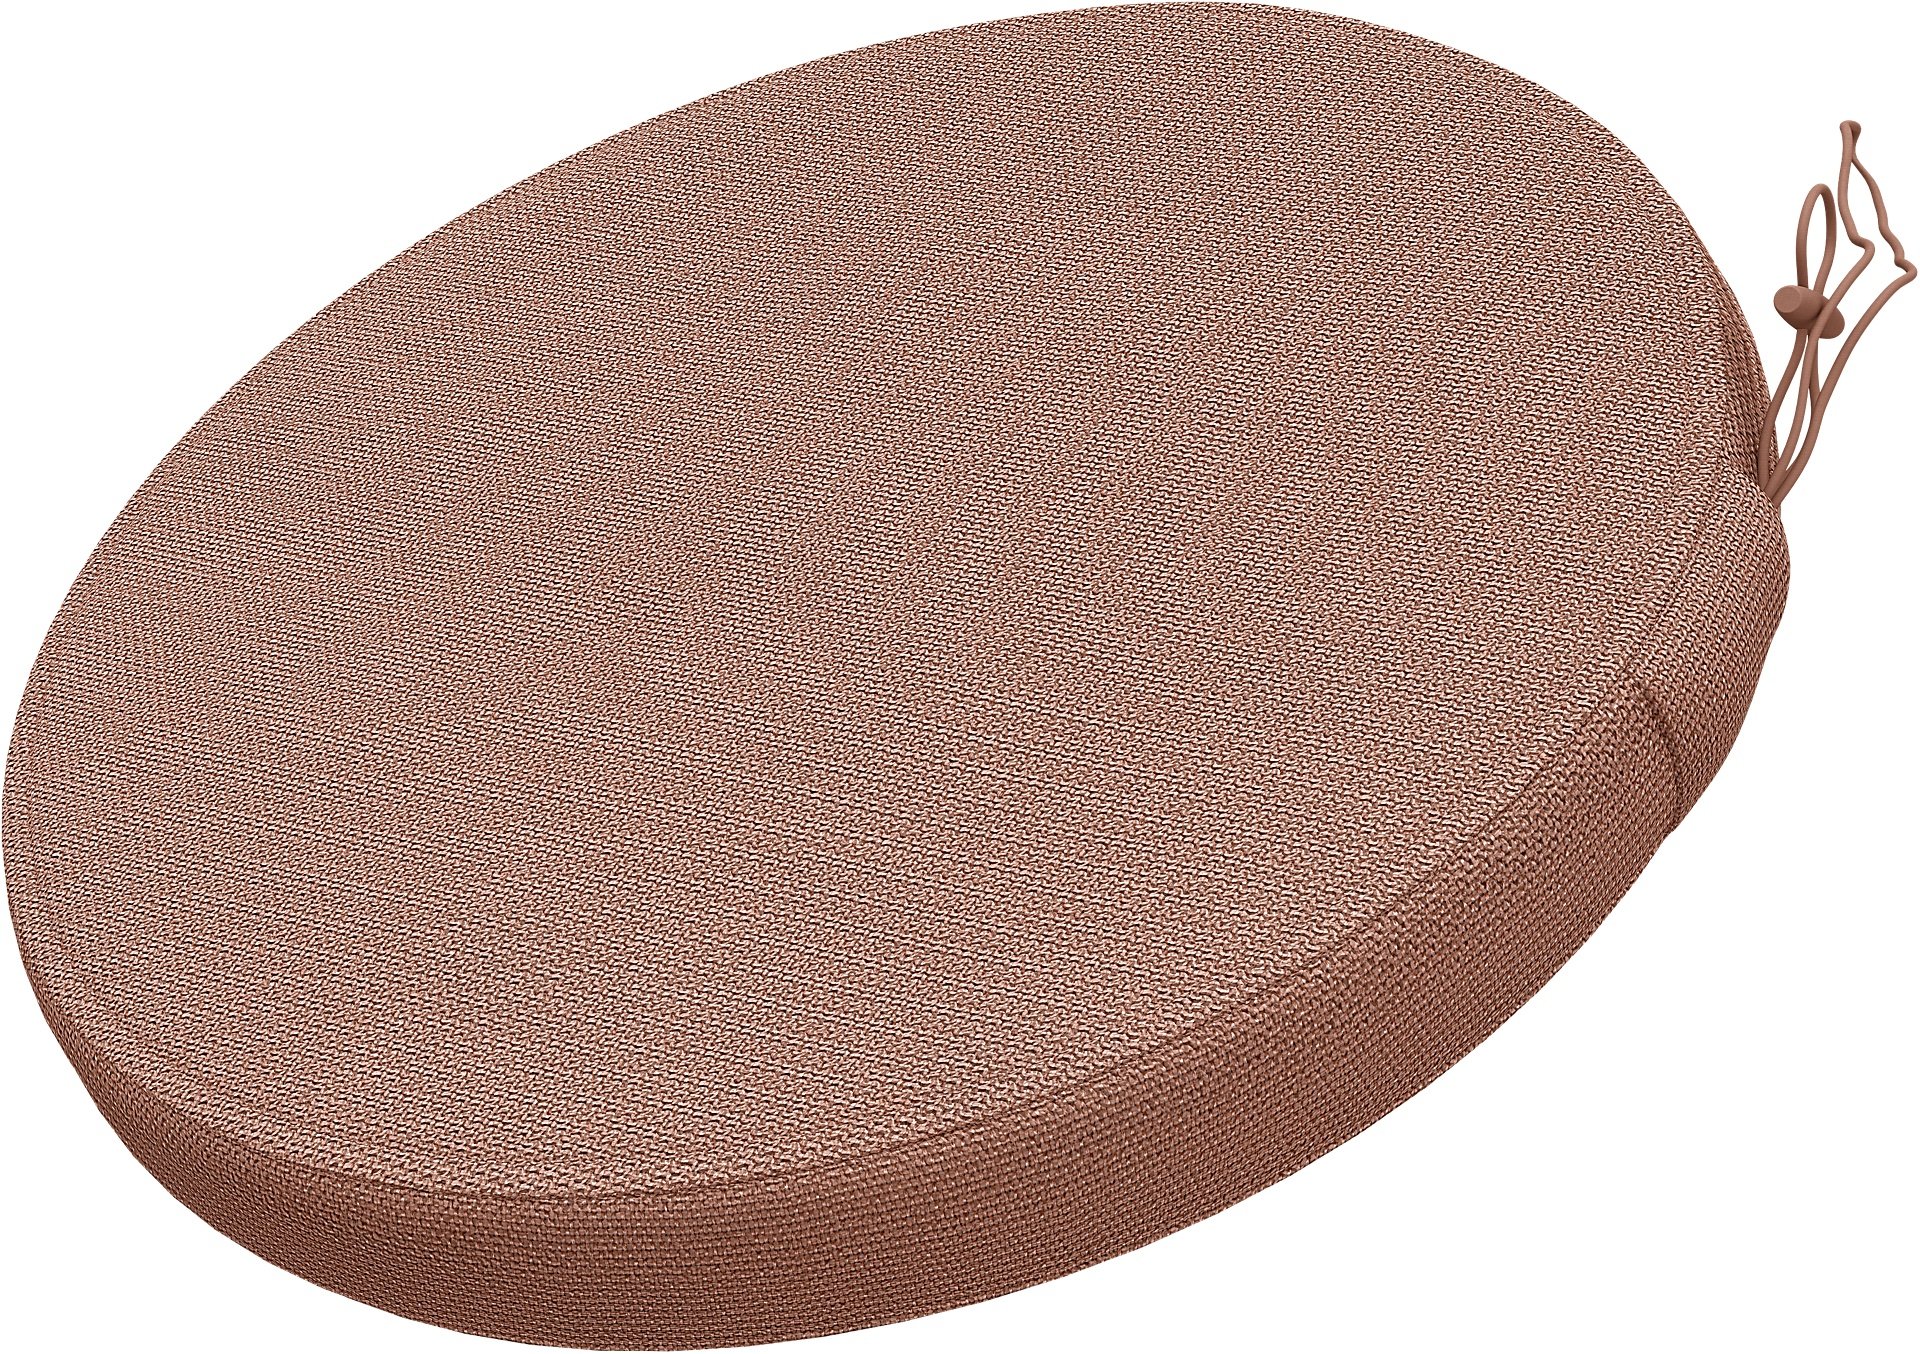 IKEA - Froson/Duvholmen Chair Seat Cushion Round Cover , Dusty Pink, Outdoor - Bemz